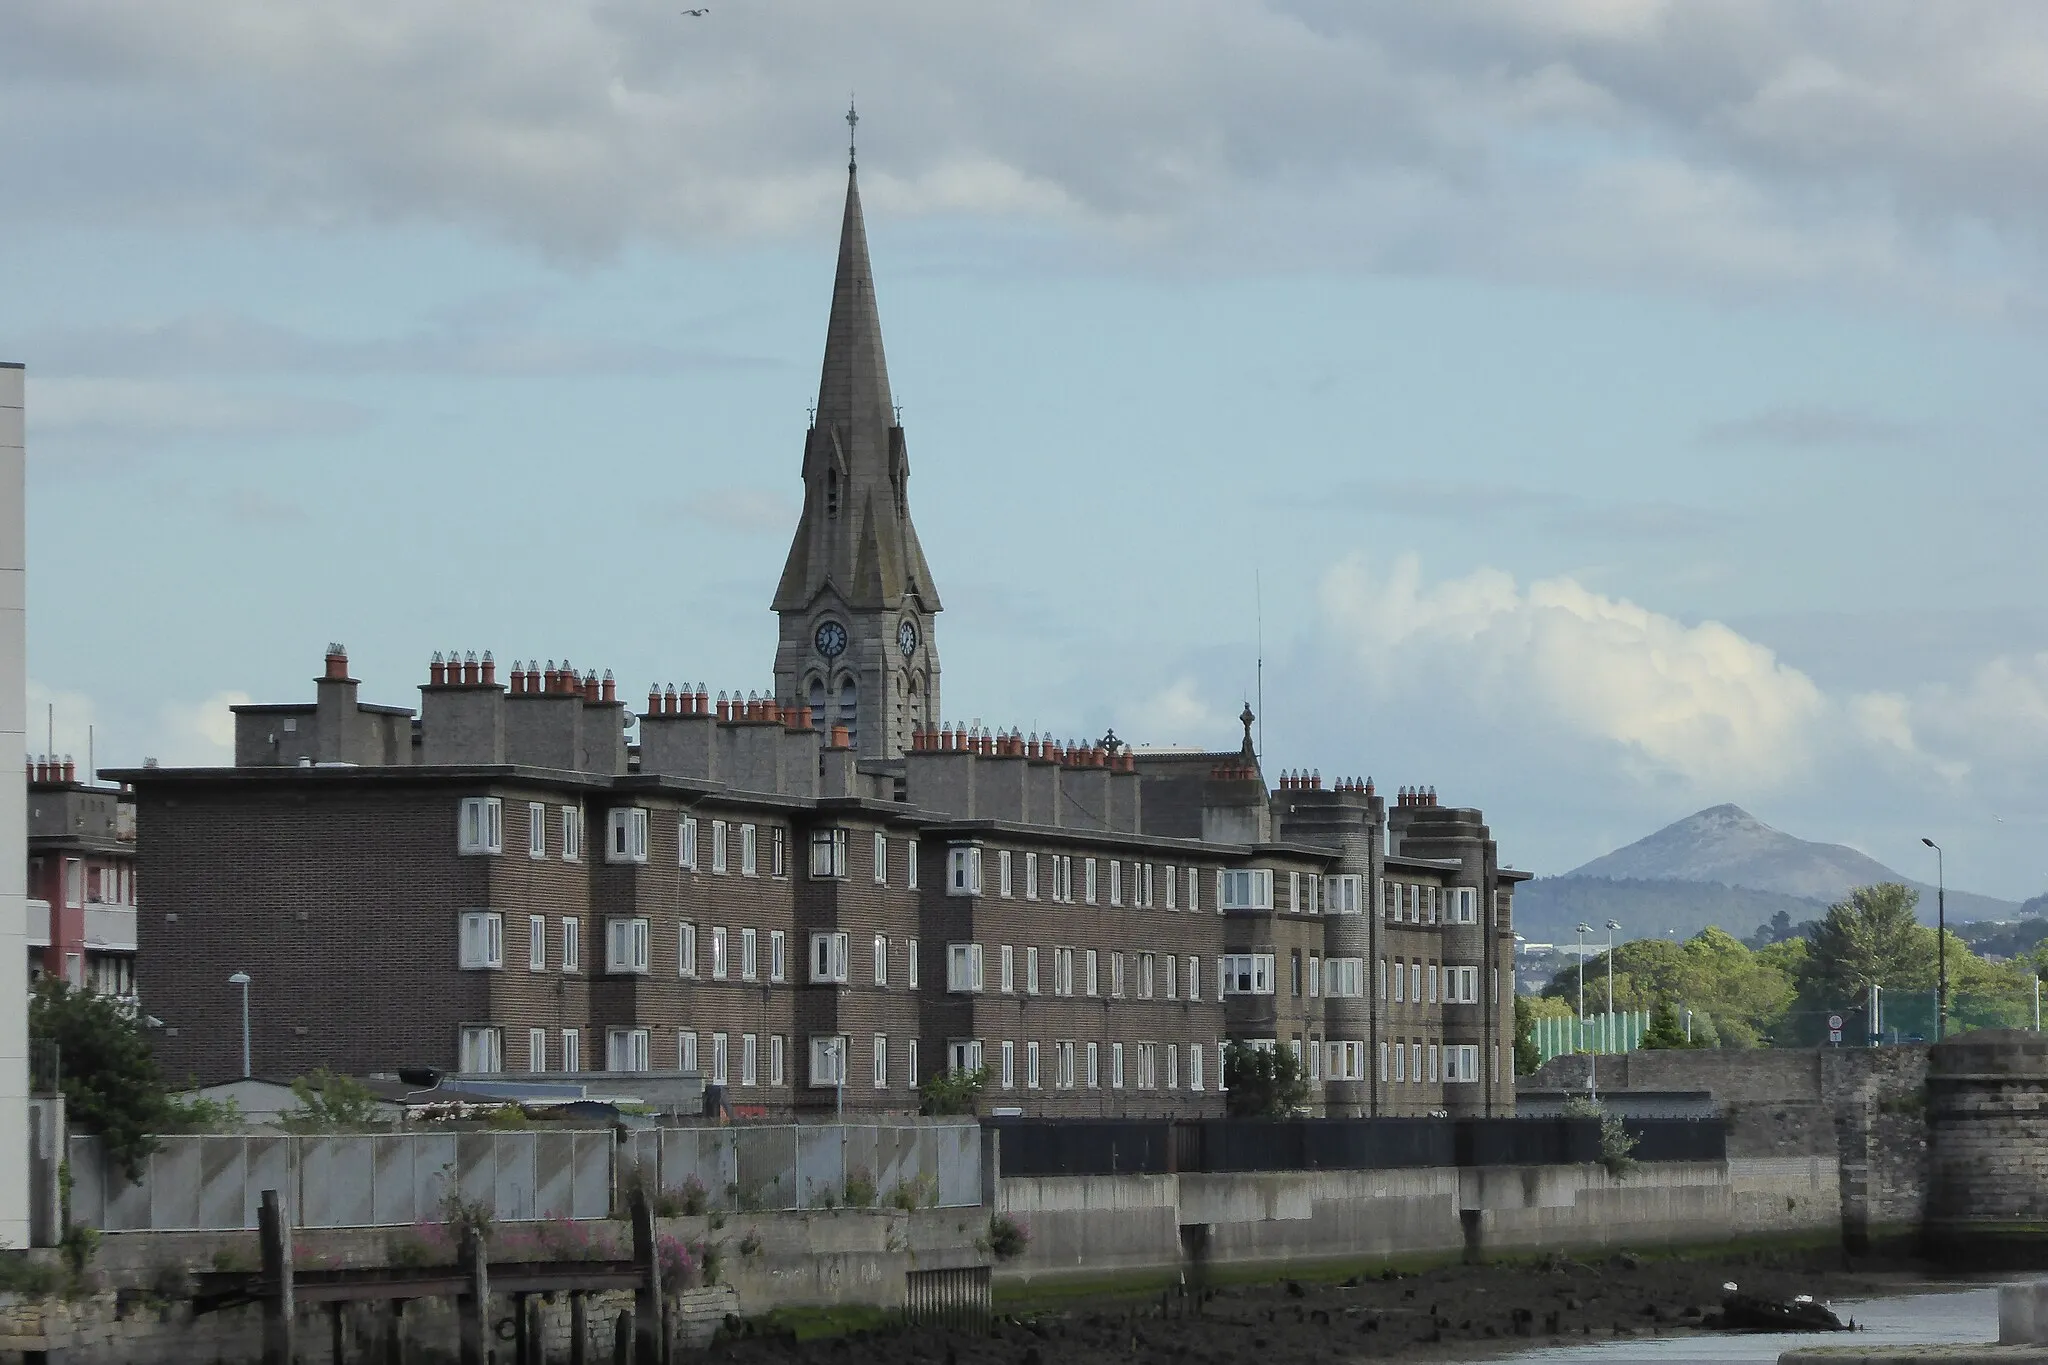 Photo showing: St. Patricks' Church and O'Rahilly House flats beside the River Dodder in Ringsend, Dublin. The Great Sugarloaf is visible in the background.